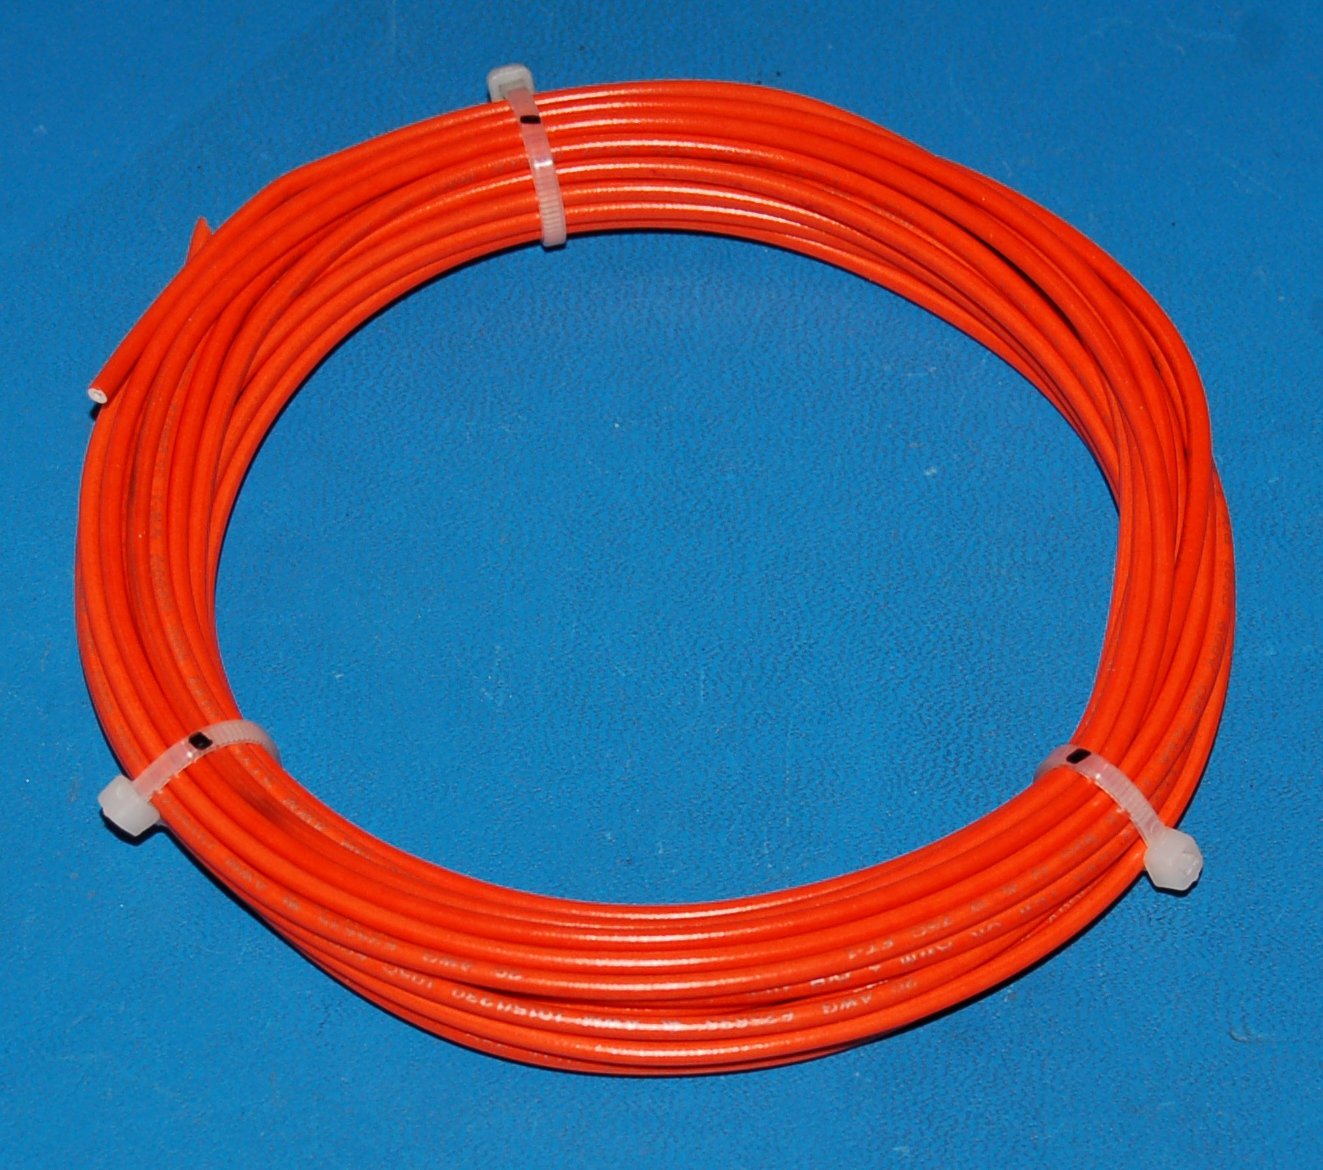 Solid Tinned Copper Wire, 600V, #20 AWG x 25' (Orange)